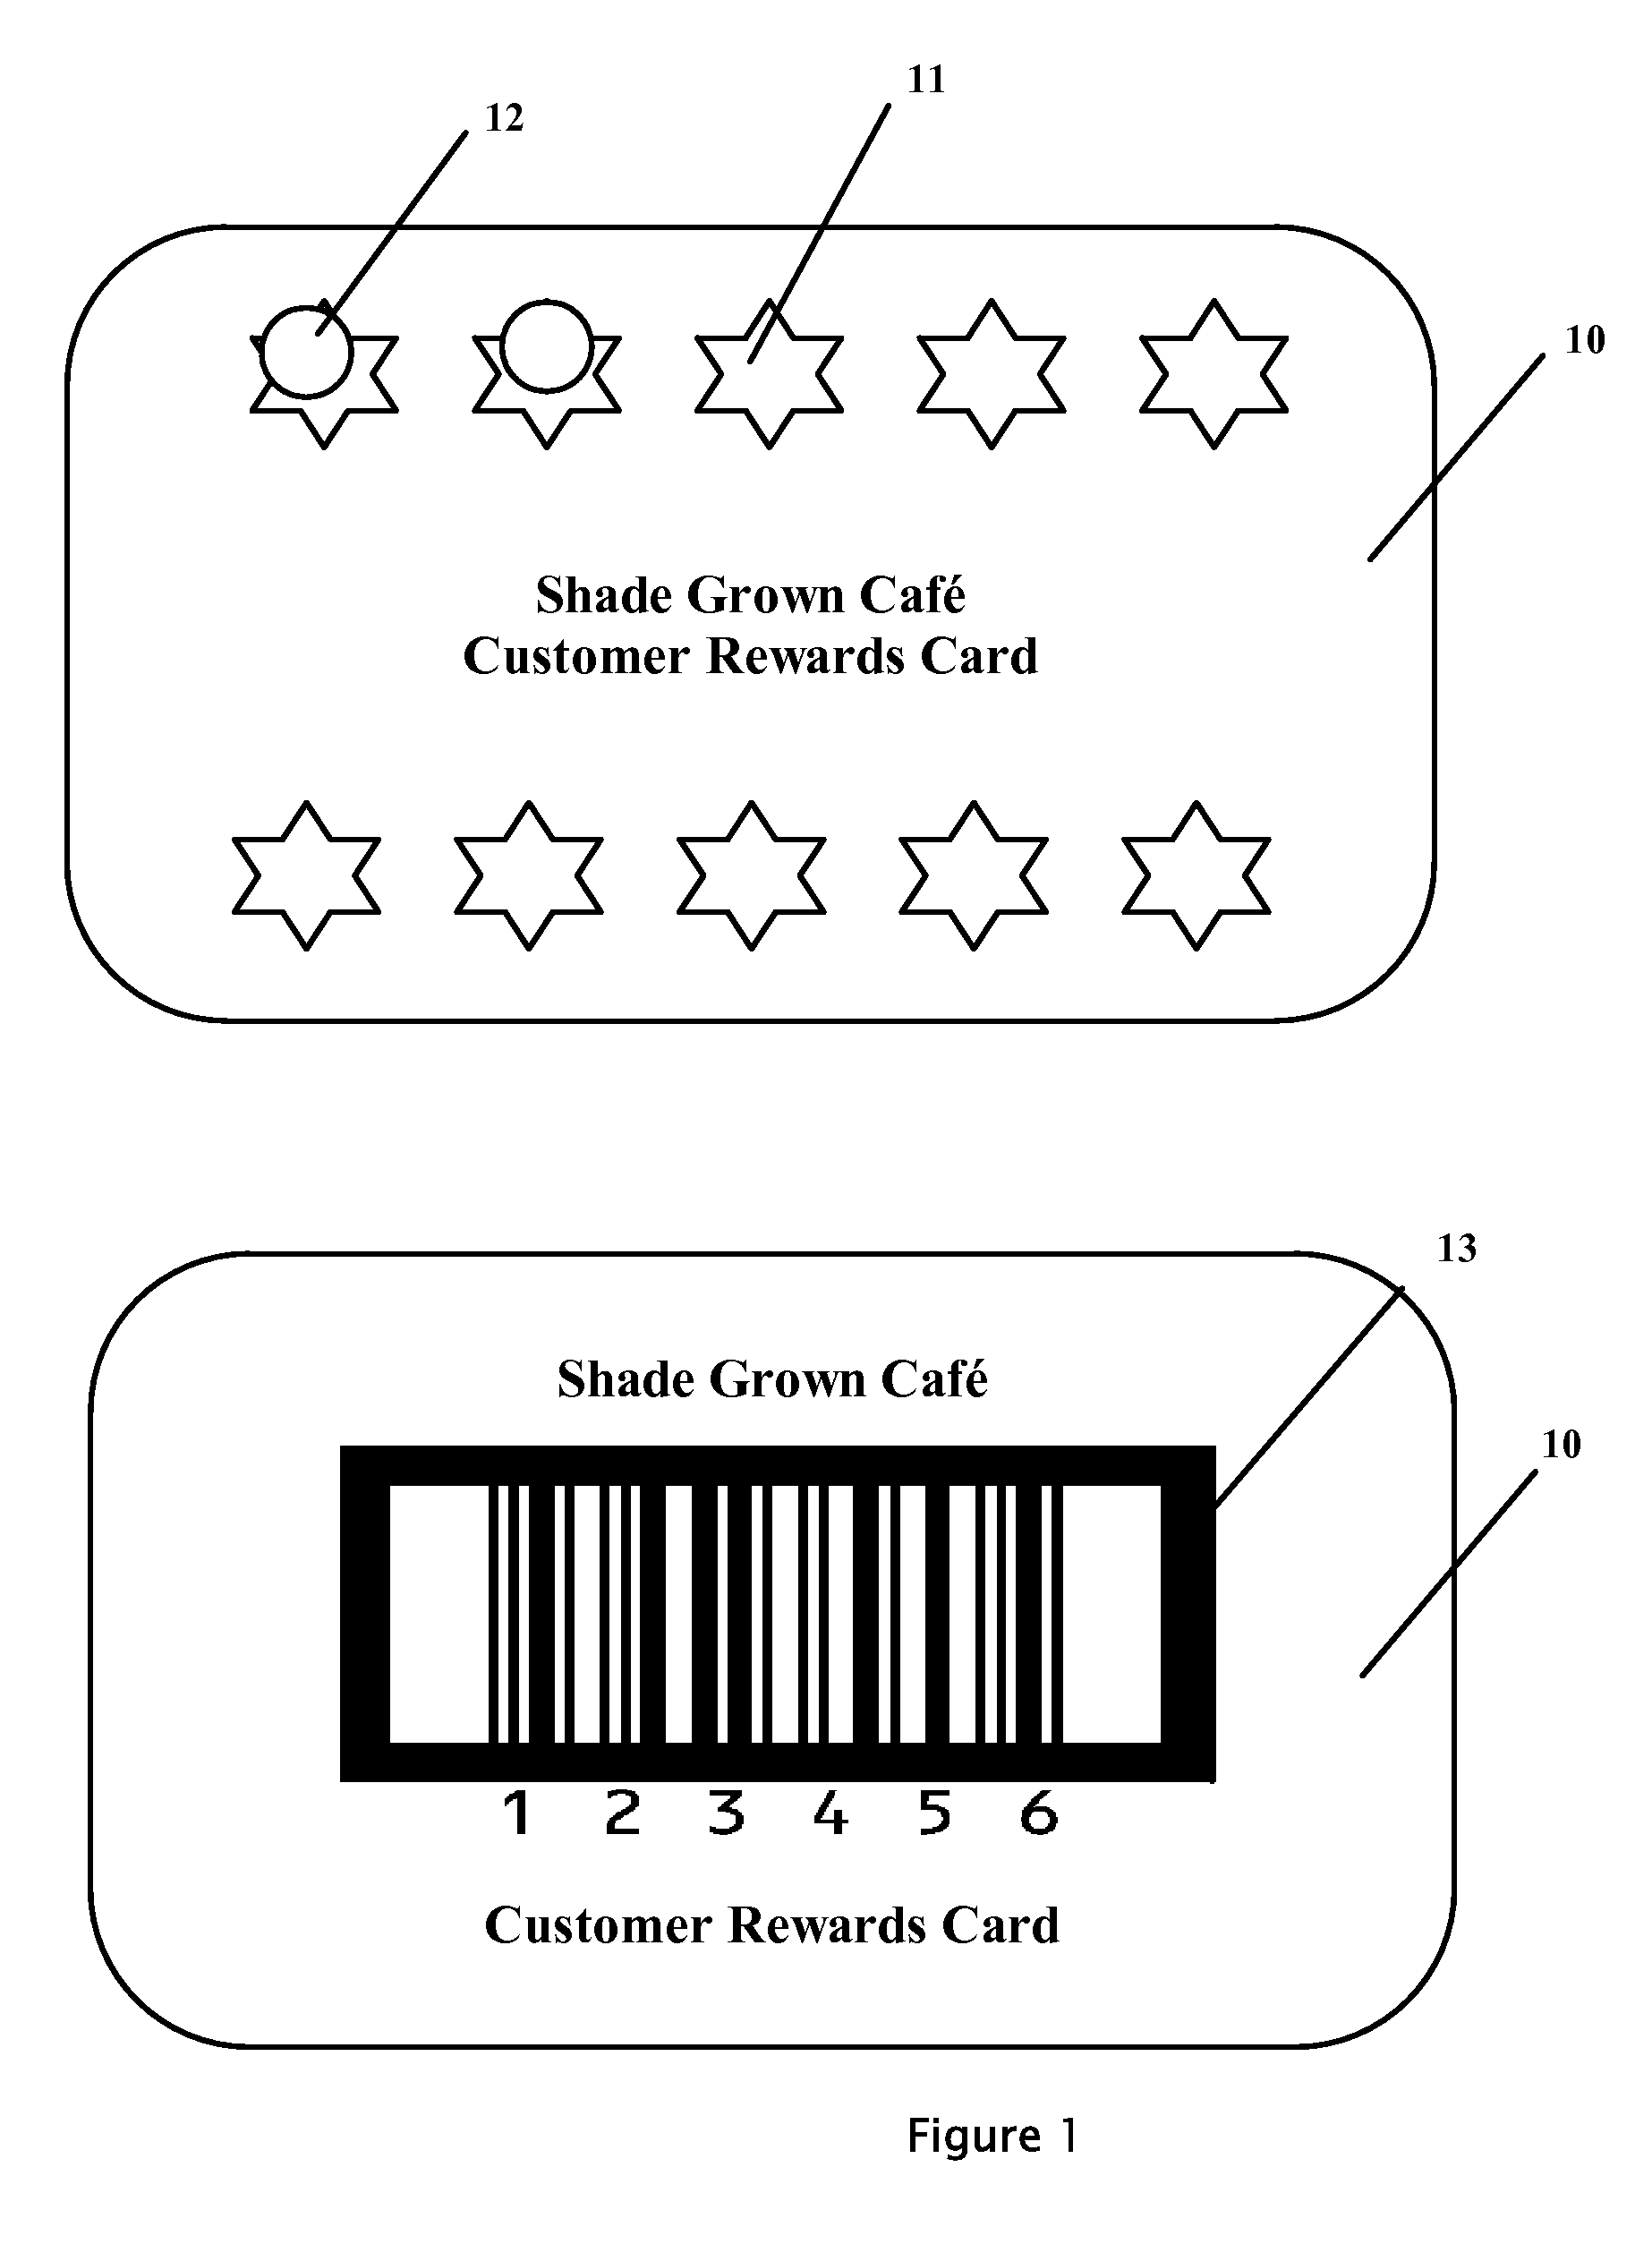 System and Method for a Customer Loyalty Program and Storage Device